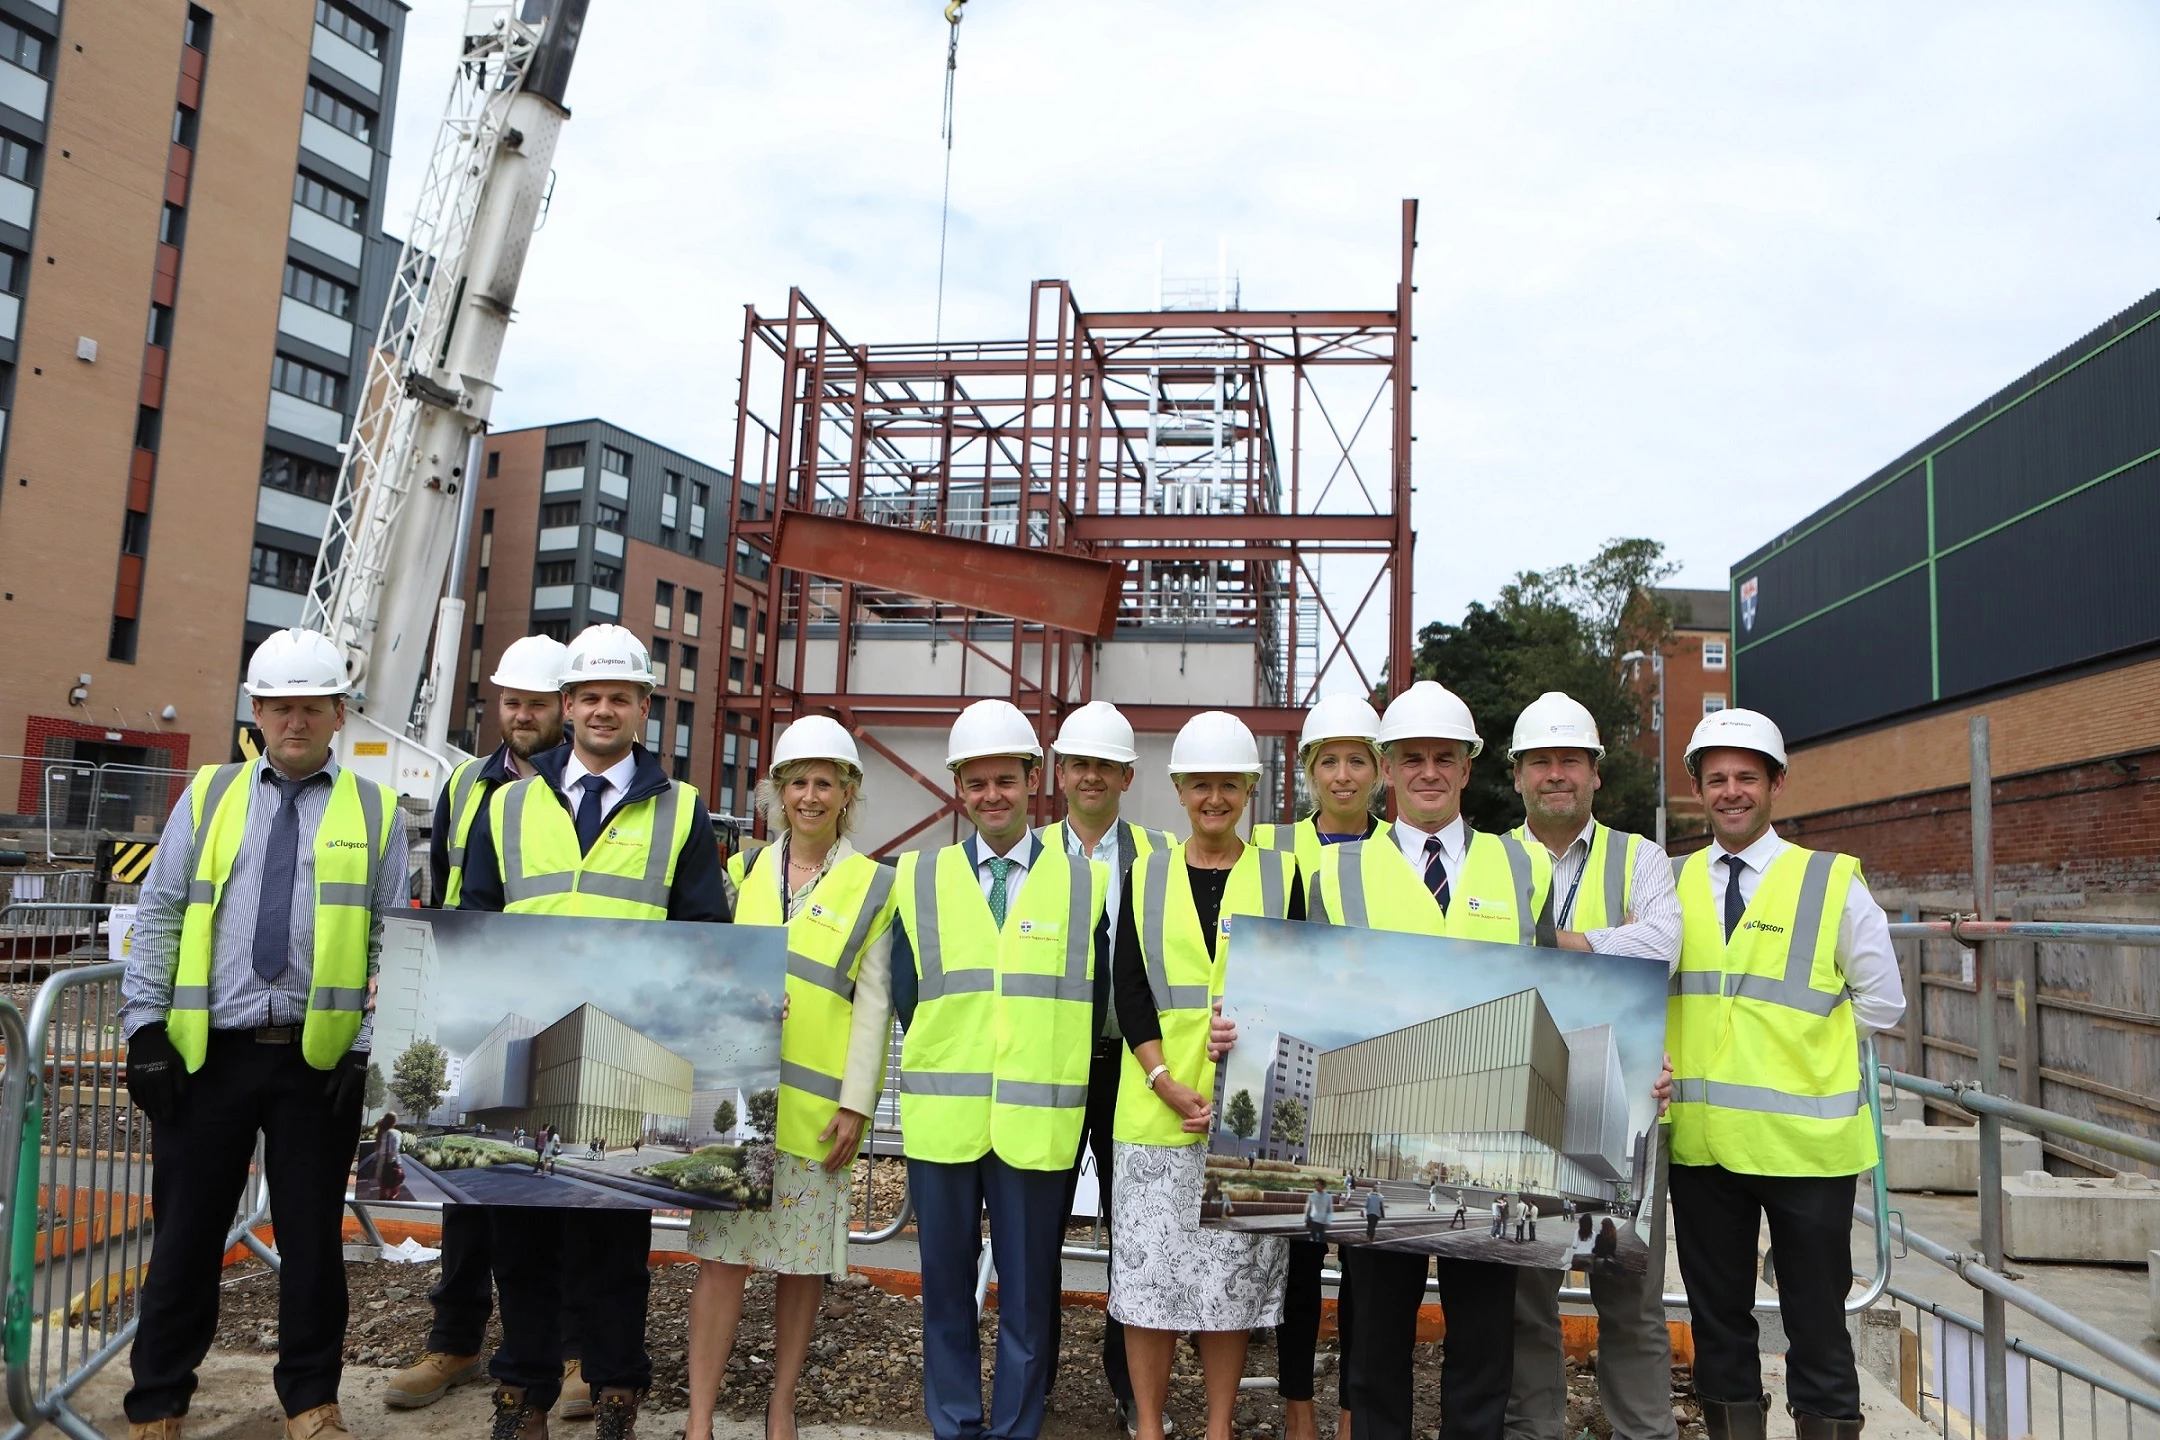 Representatives of the university, Muckle LLP and Clugston Construction